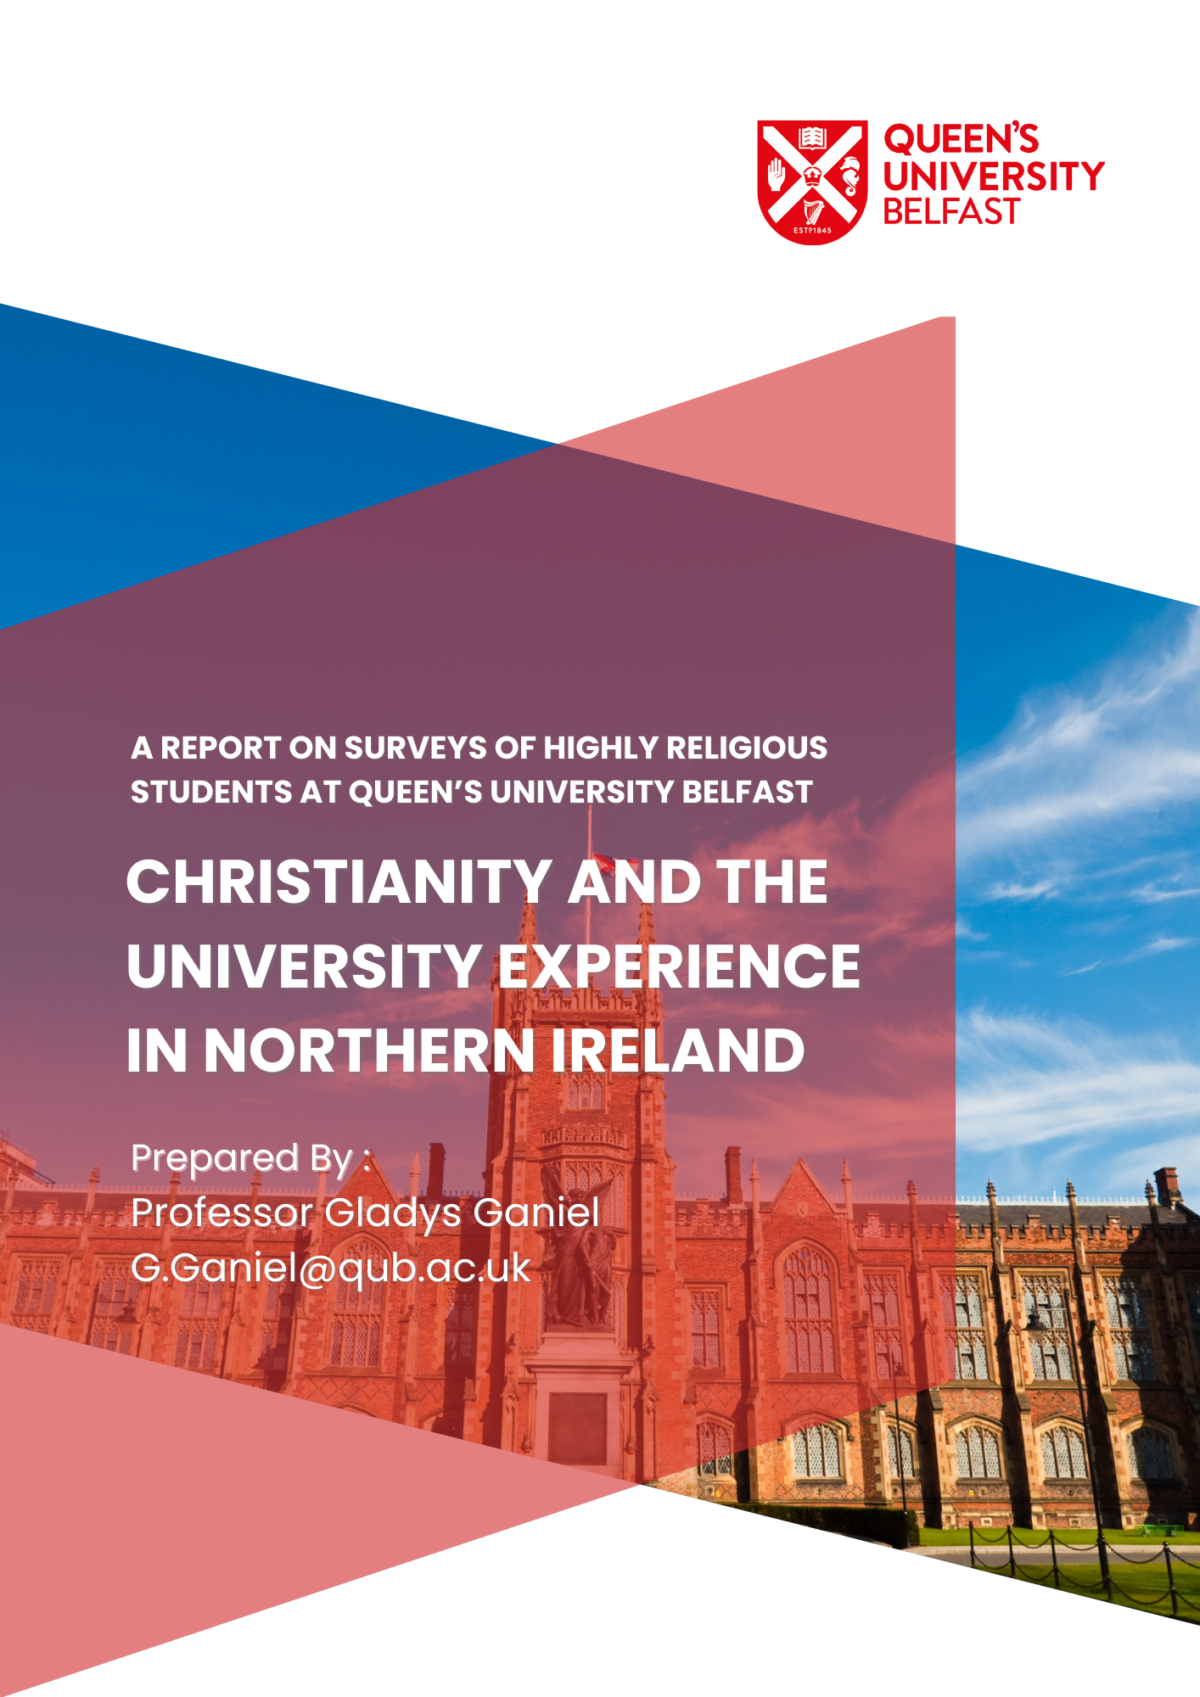 Religion & the University Experience in Britain and Northern Ireland with Mathew Guest and me …